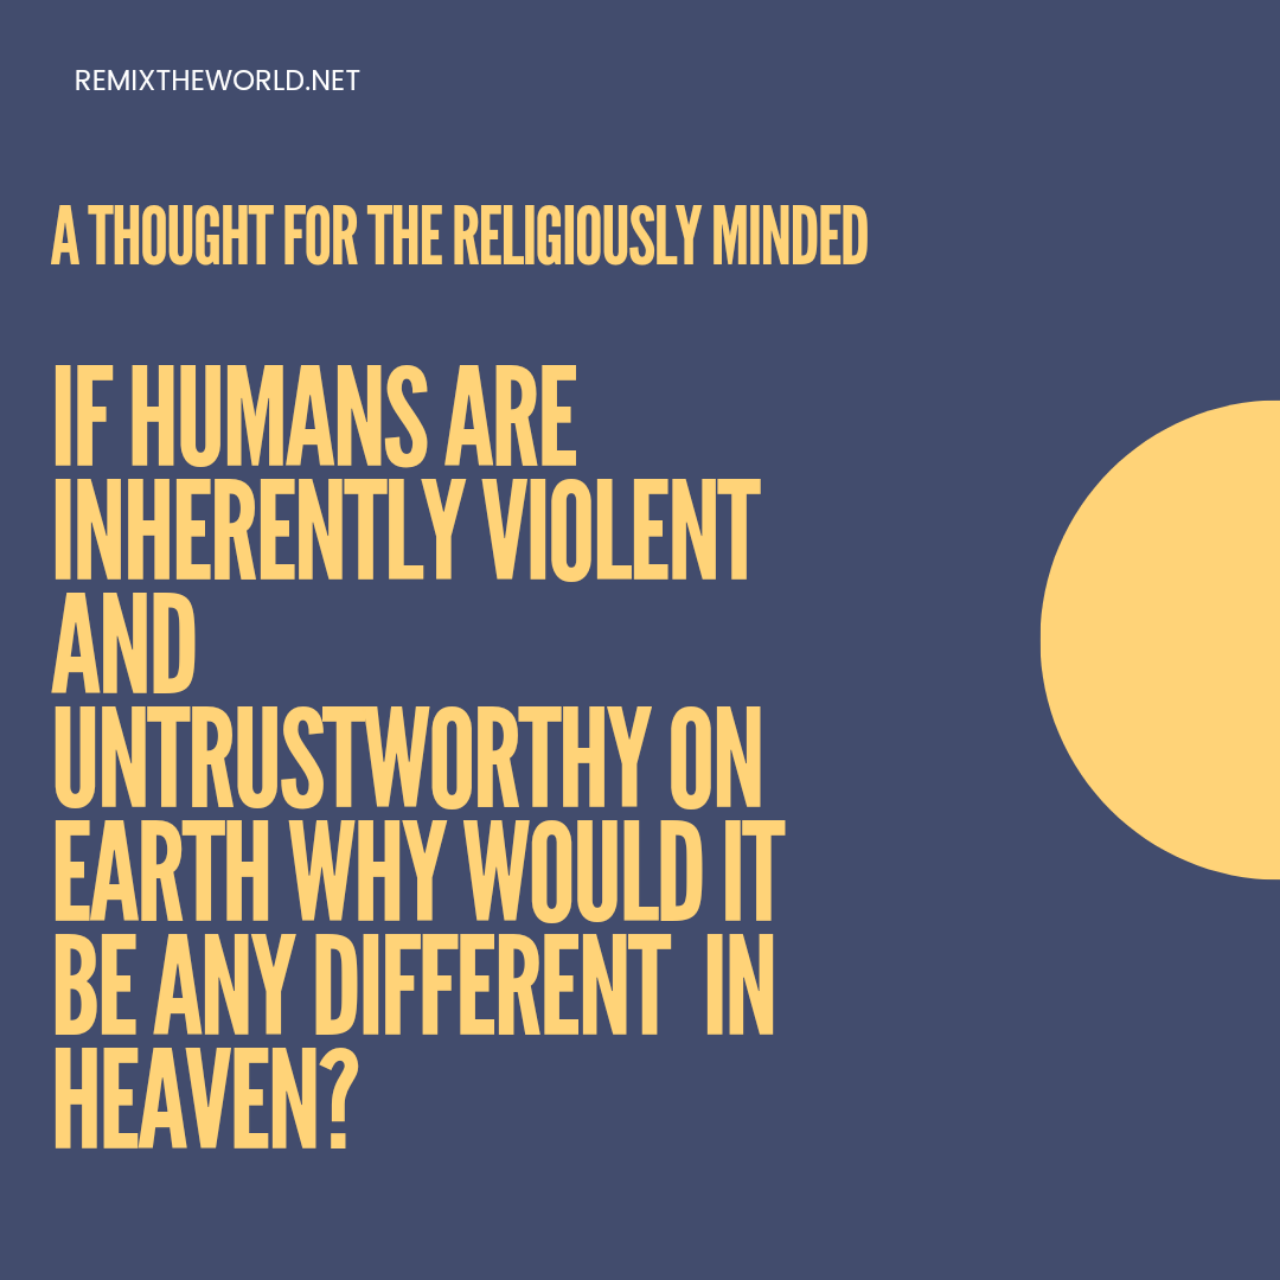 A THOUGHT FOR THE RELIGIOUSLY MINDED